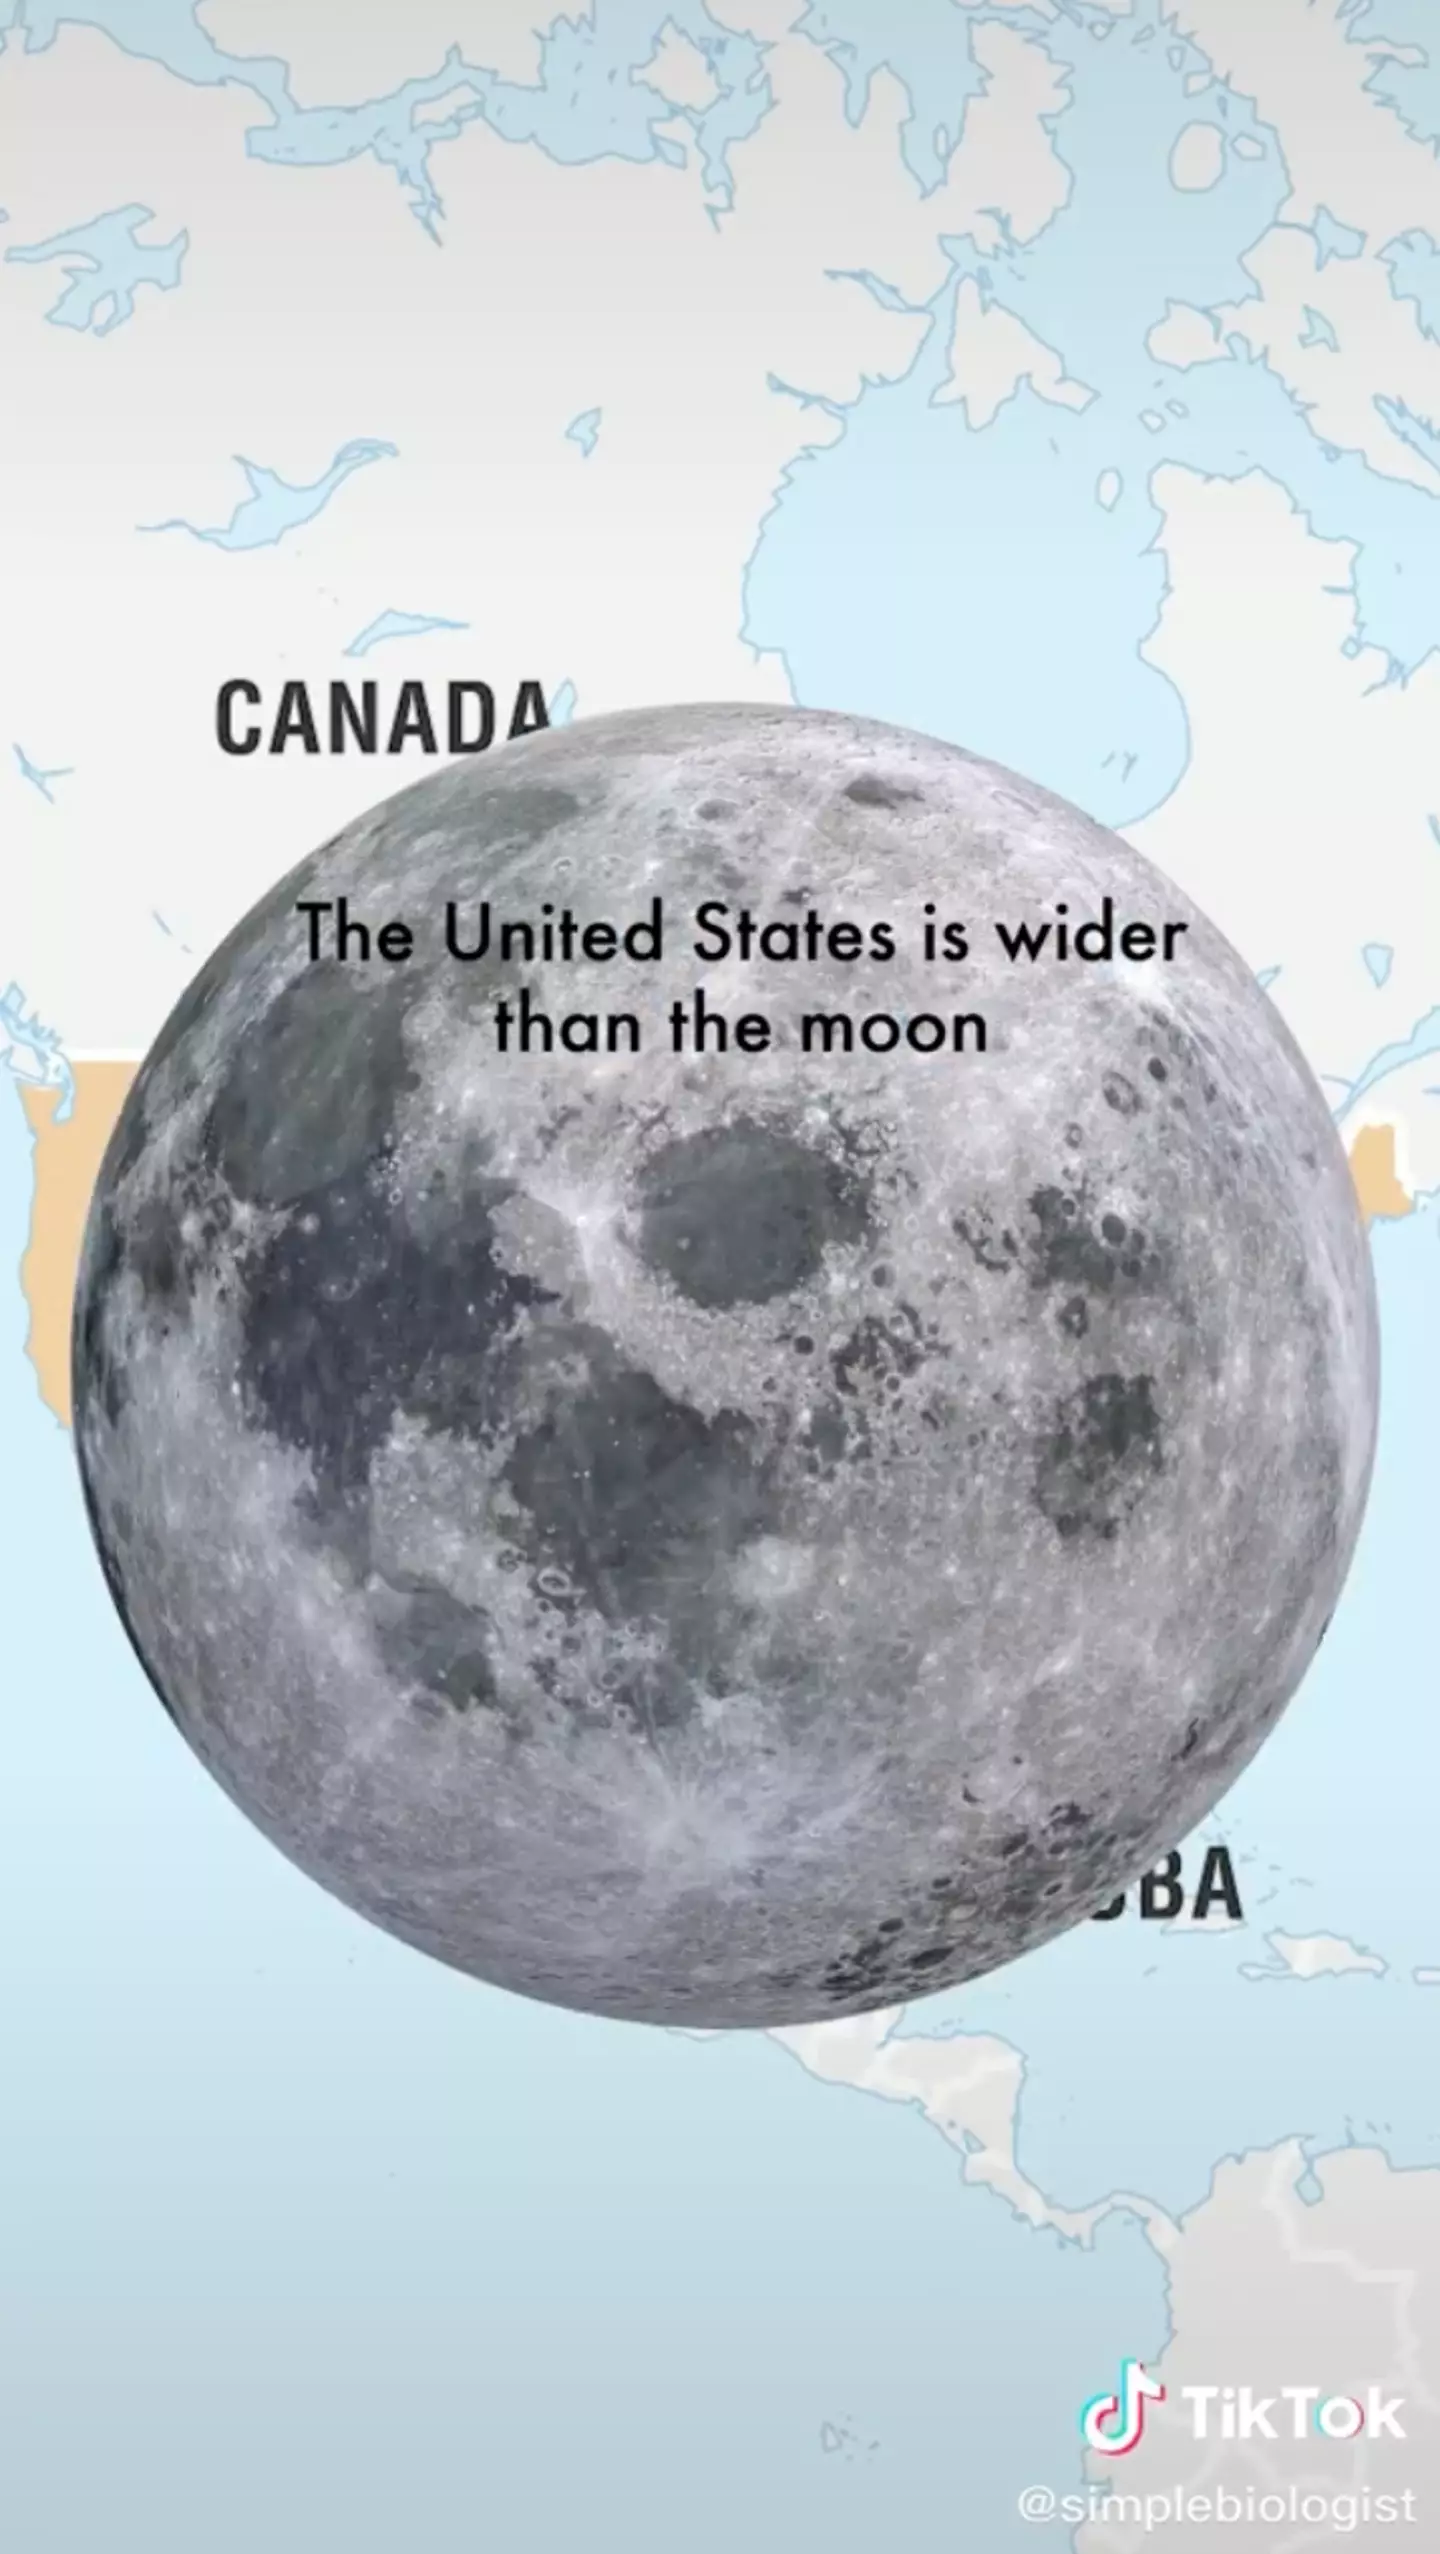 A theory on TikTok has been suggesting that the US is wider than the moon.